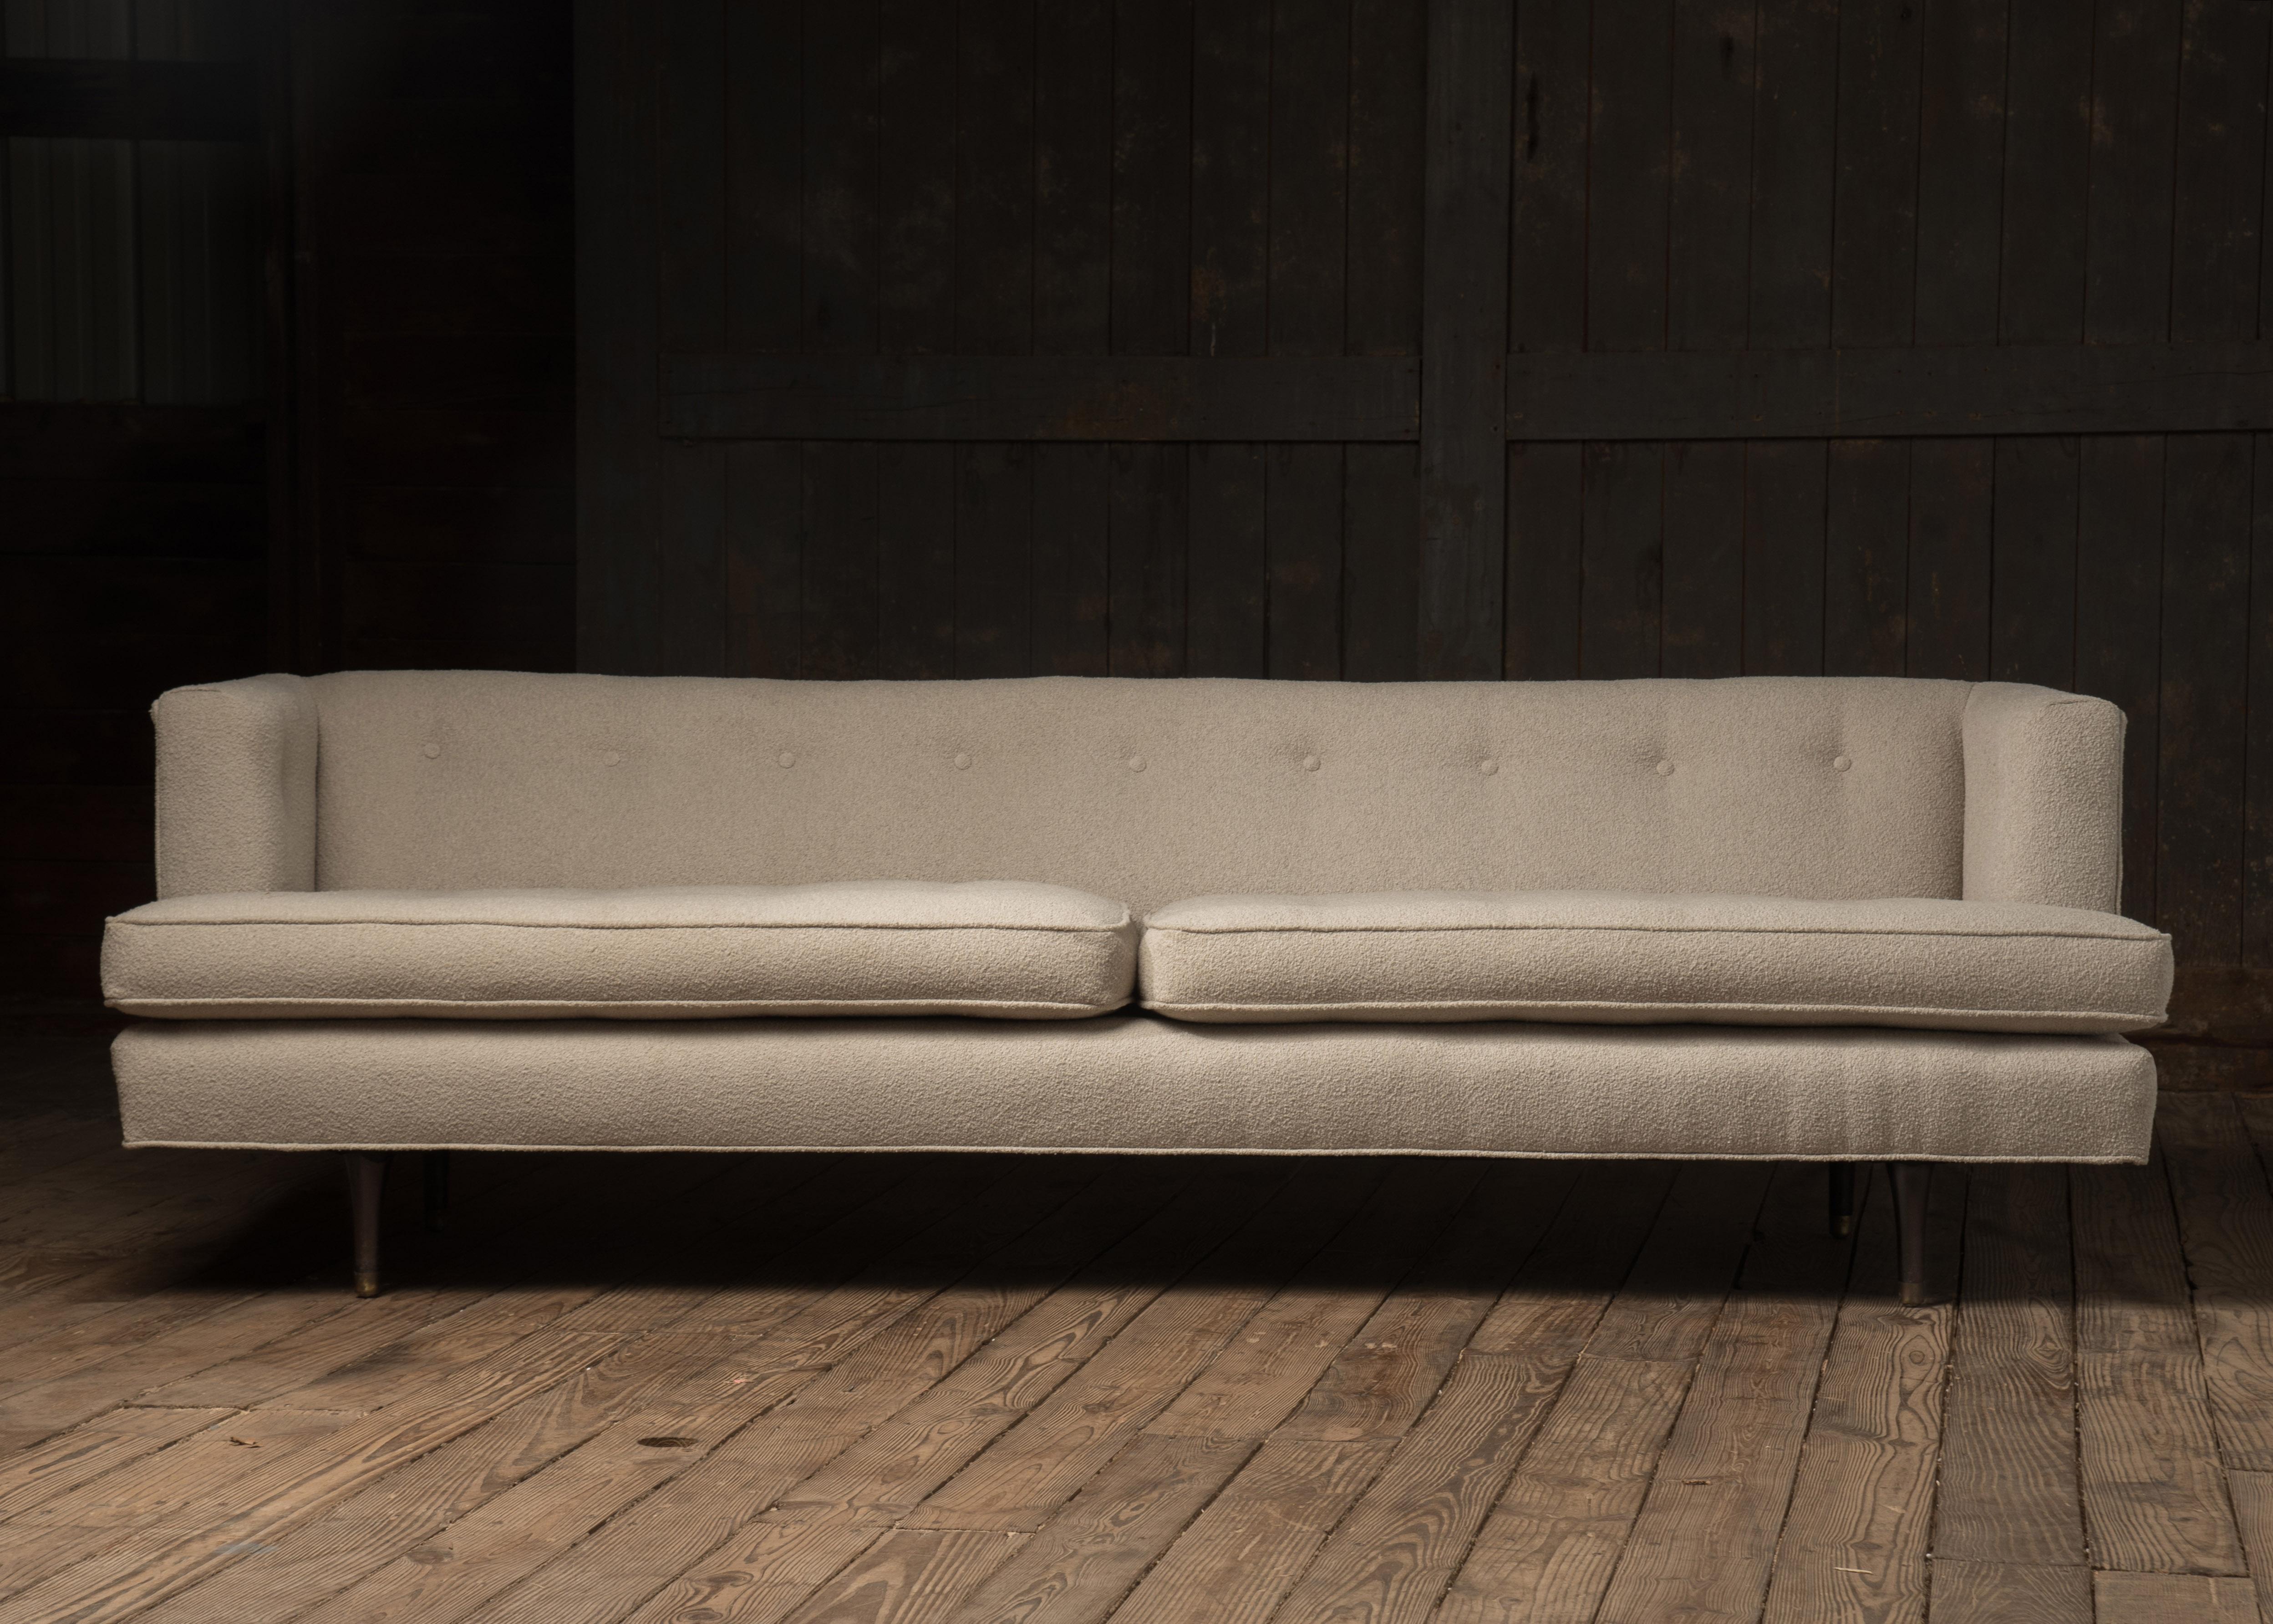 Iconic sleek and sexy Dunbar midcentury modern sofa by Edward Wormley, just reupholstered in an appropriate to the style nubby off-white fabric.
Measures: Seat height 18.5.